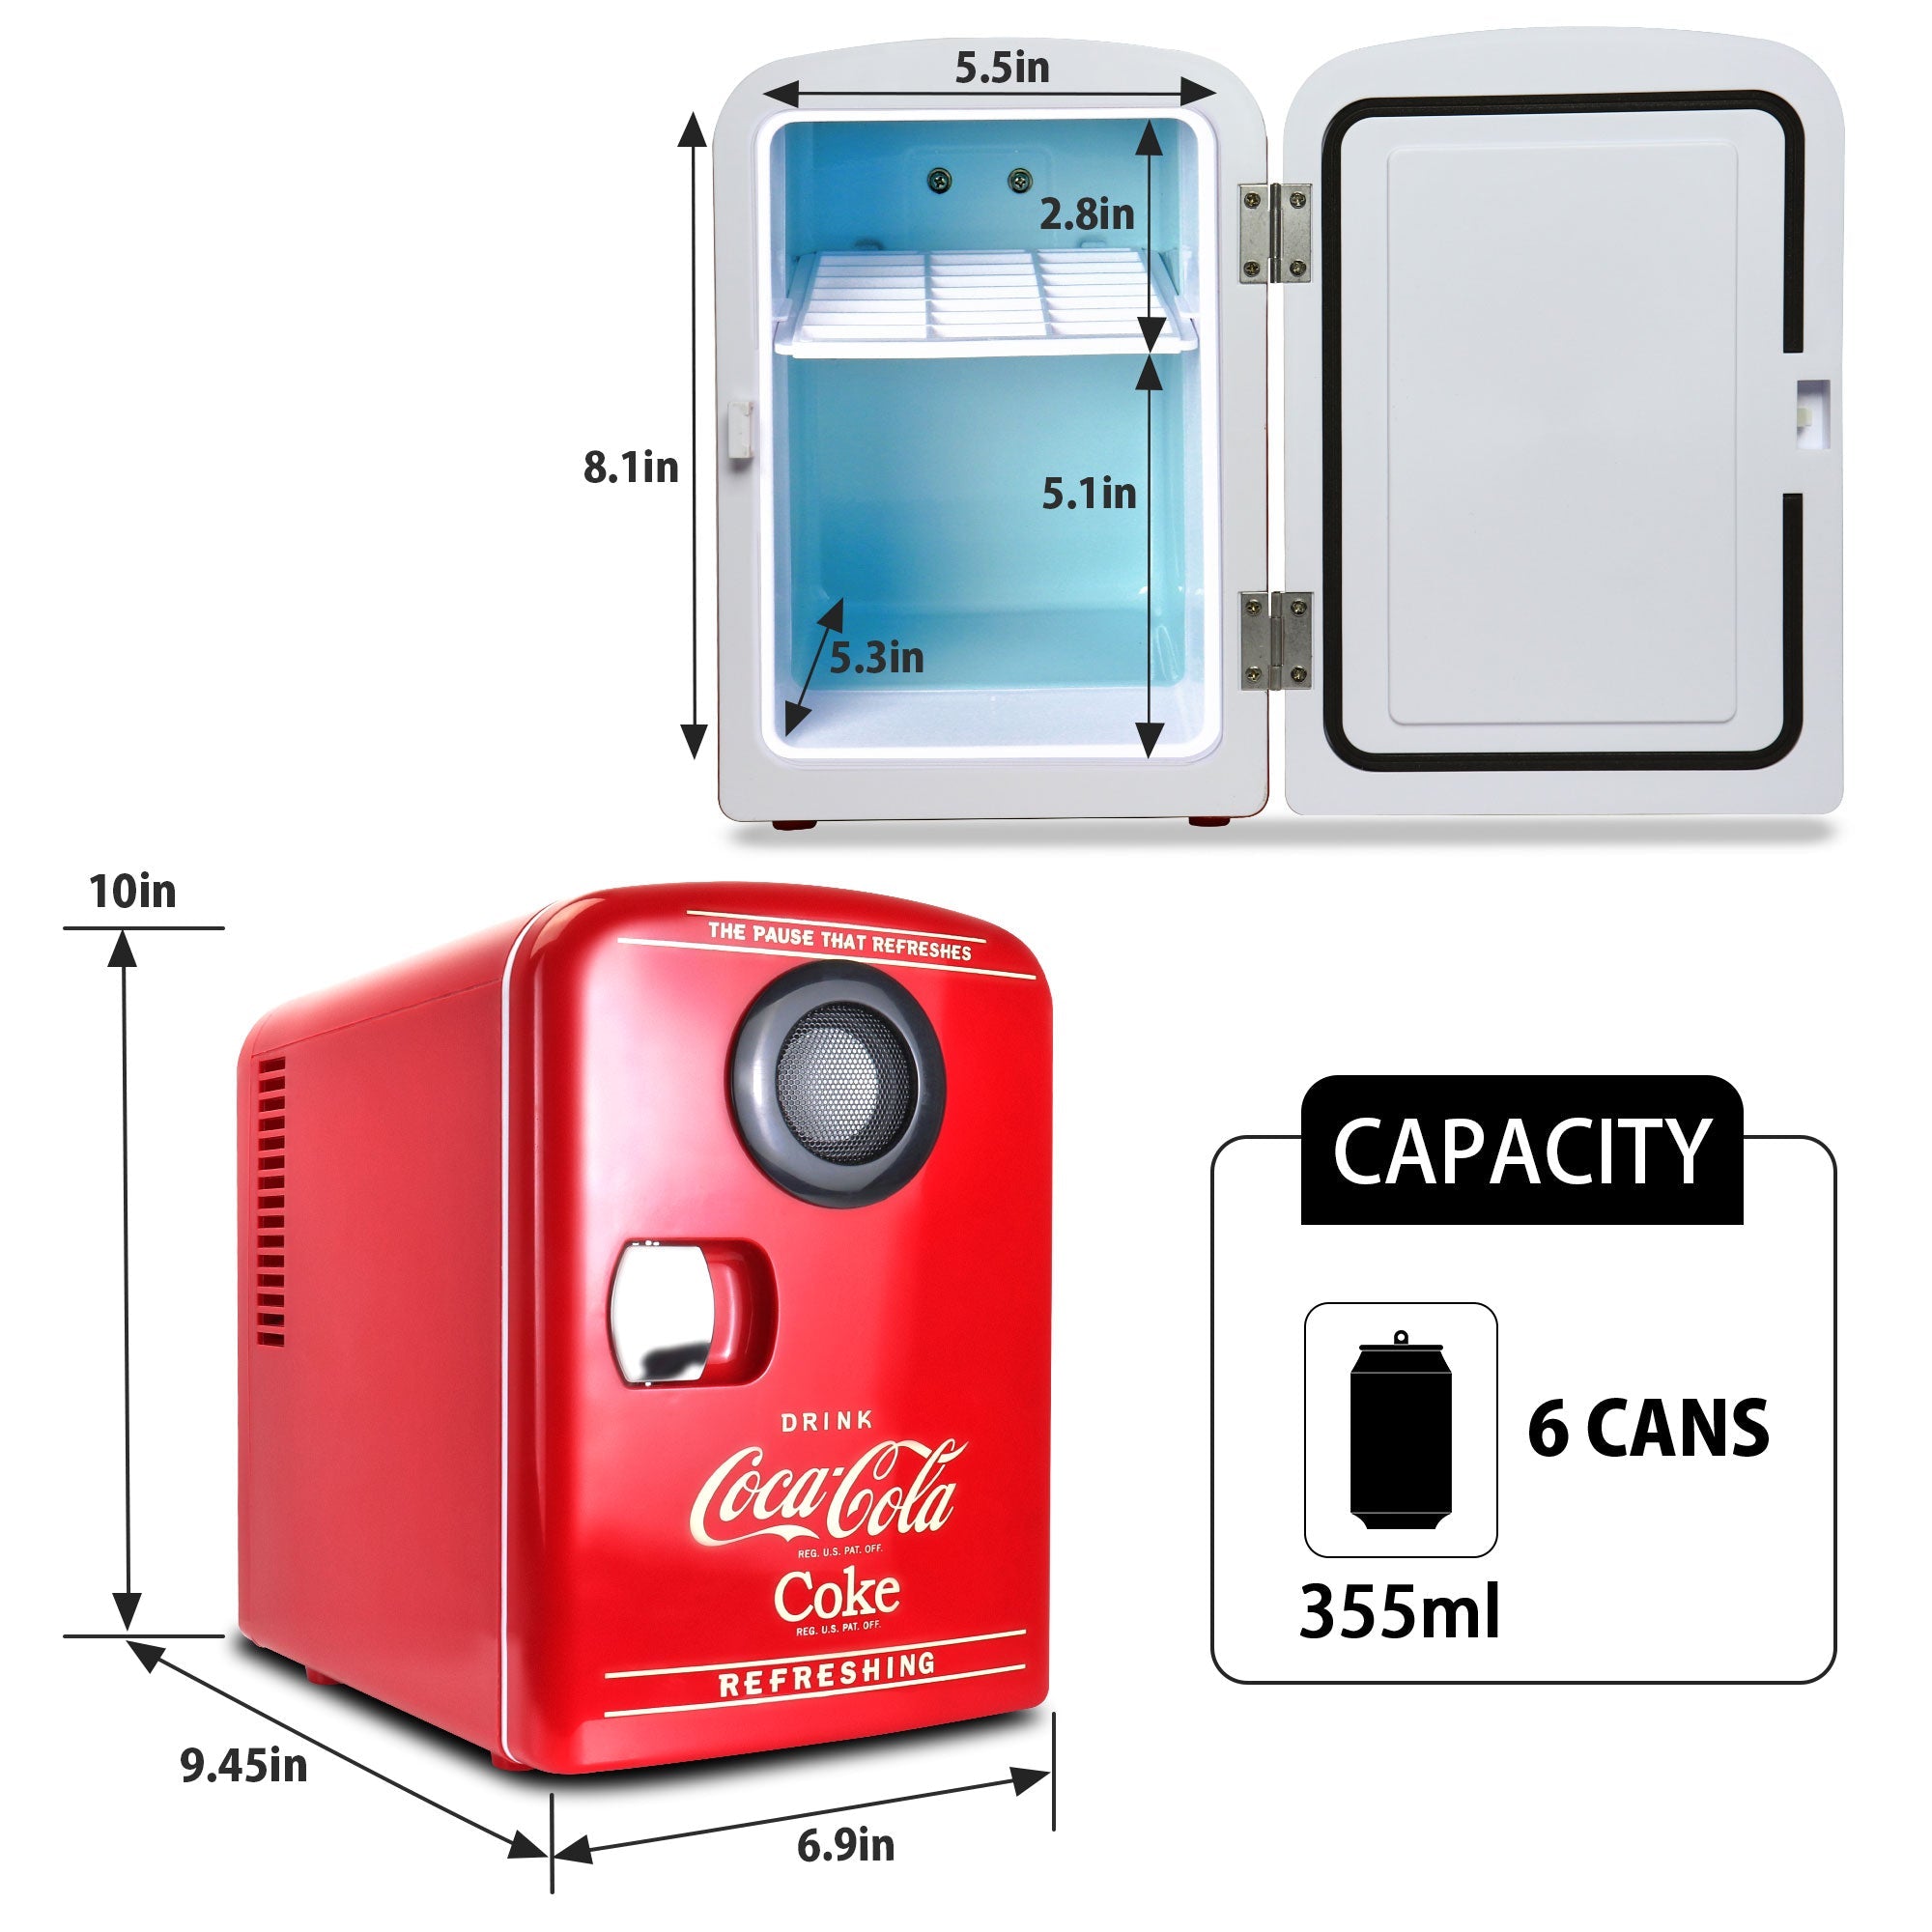 Two product shots of Coca-Cola 4L travel cooler with wireless speaker, open and closed, on a white background, with interior and exterior dimensions labeled. Inset text and icons describes: Capacity - 6 cans 355 mL